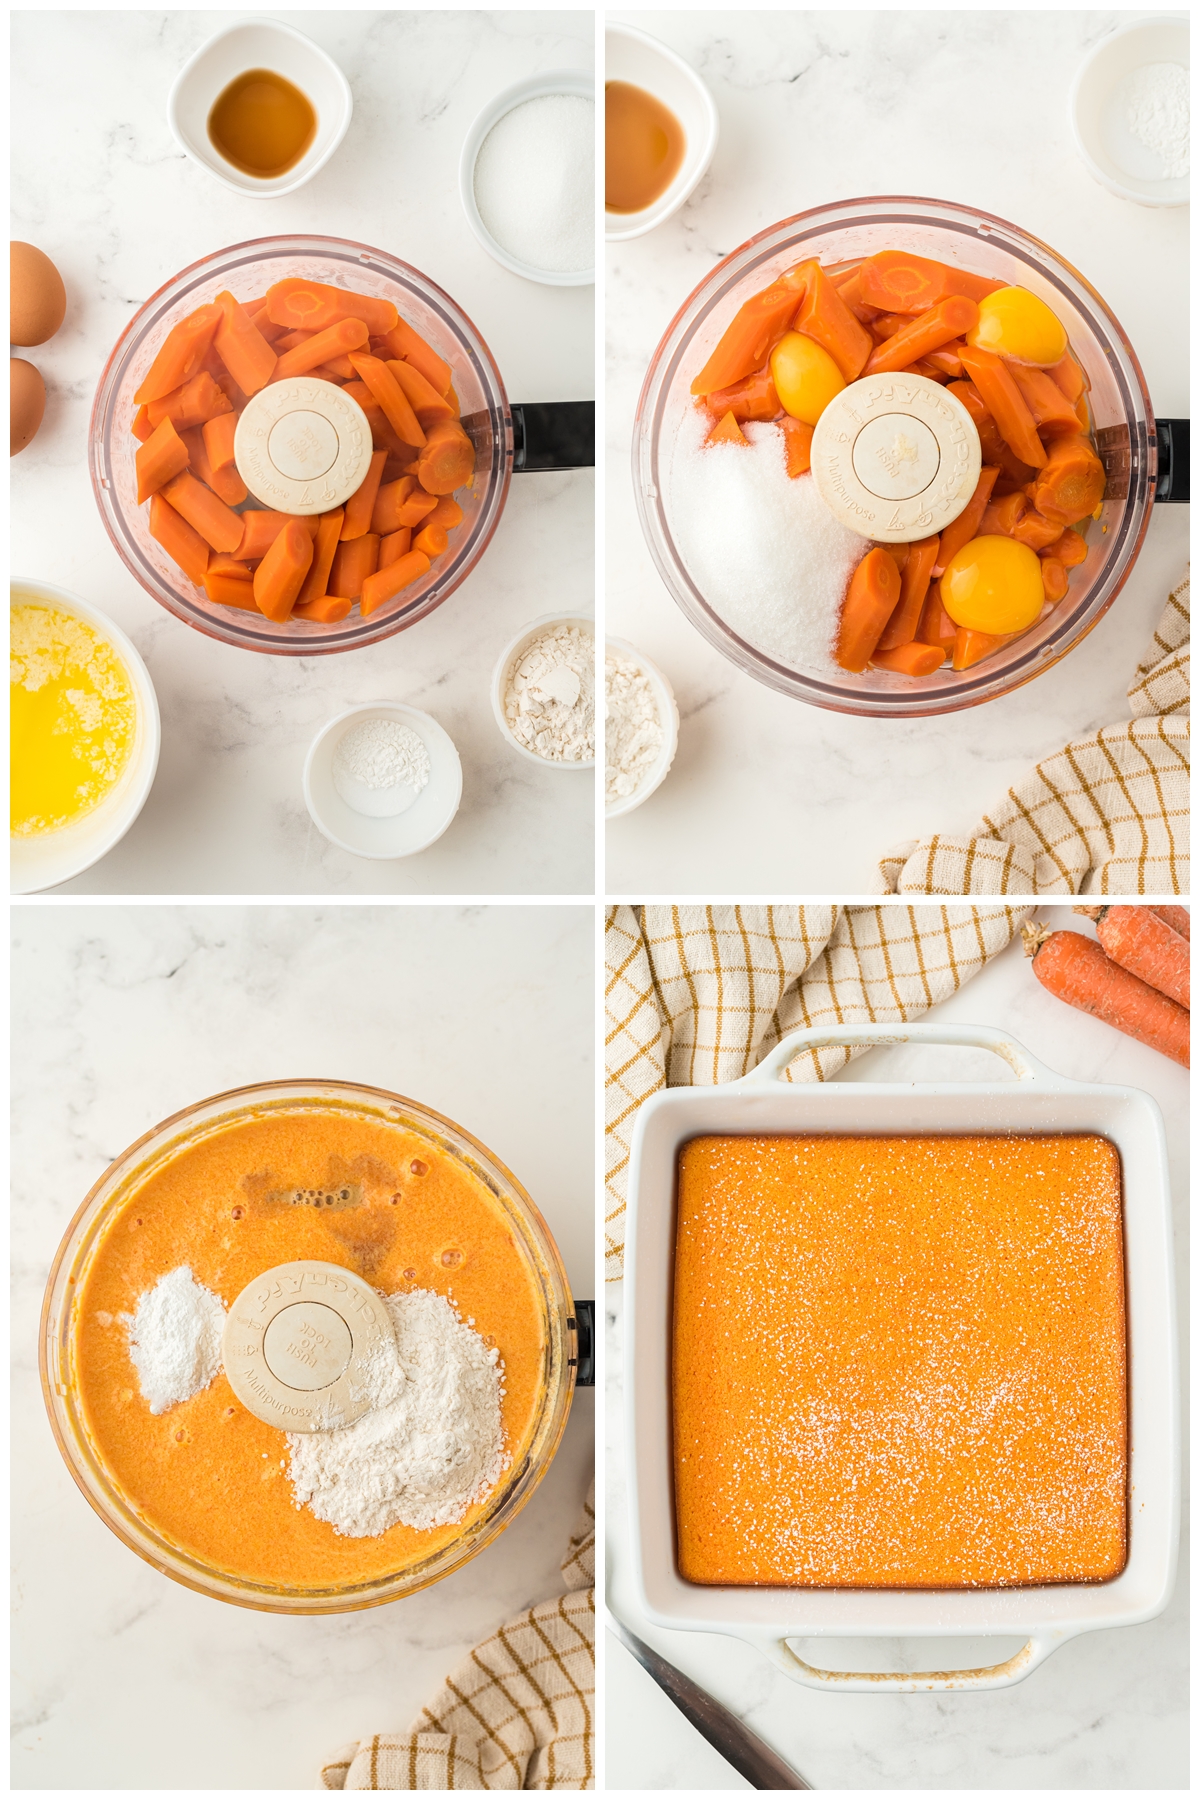 Procedure on preparing a Carrot Souffle. First is peel the carrots into small chunks then boil it. Drain and add melted butter eggs and sugar and blend until smooth. Add flour and baking powder and vanilla. Then blend again and bake for 40-45 minutes until golden brown and firm. Can be garnished with powdered sugar.